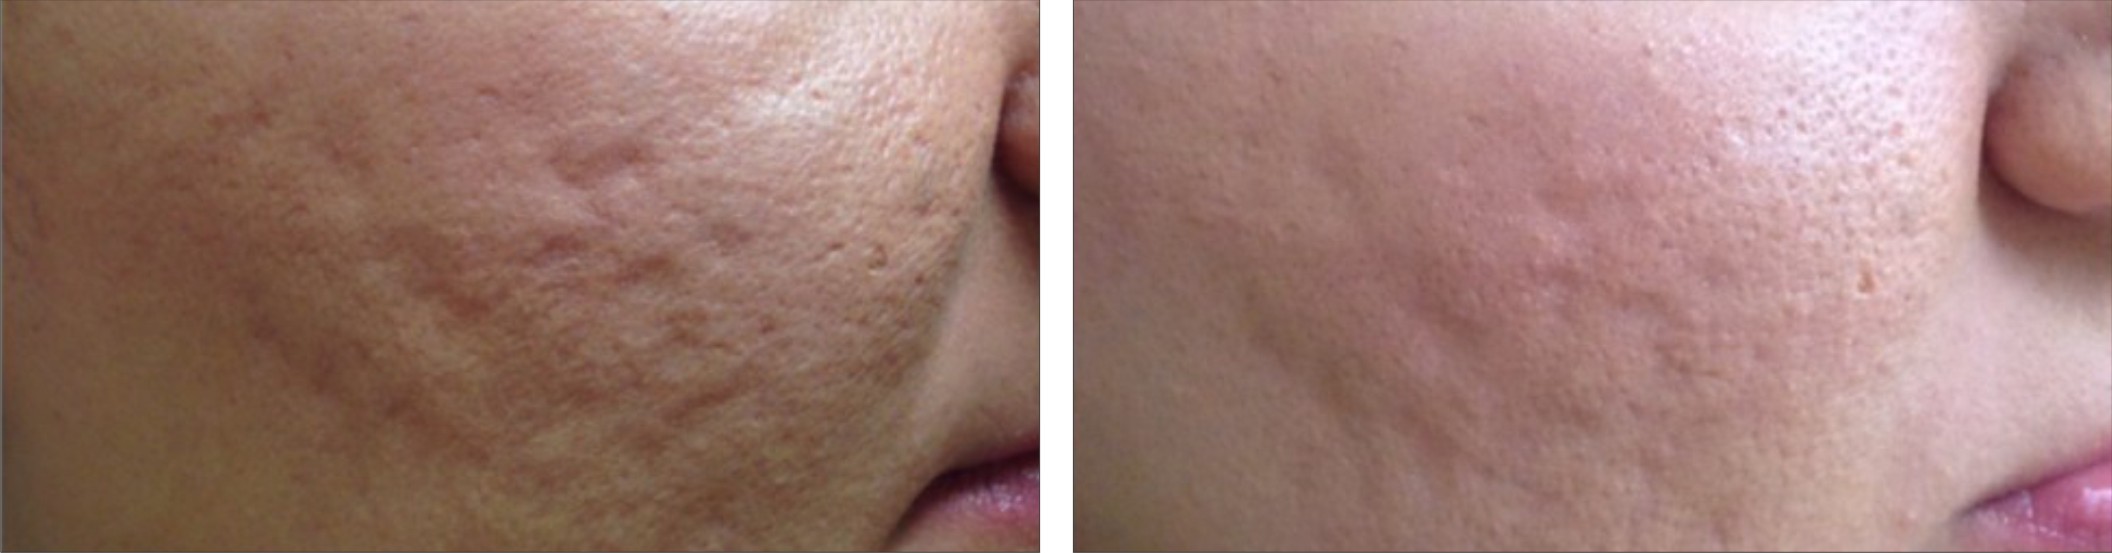 Collagen Induction Therapy Image One